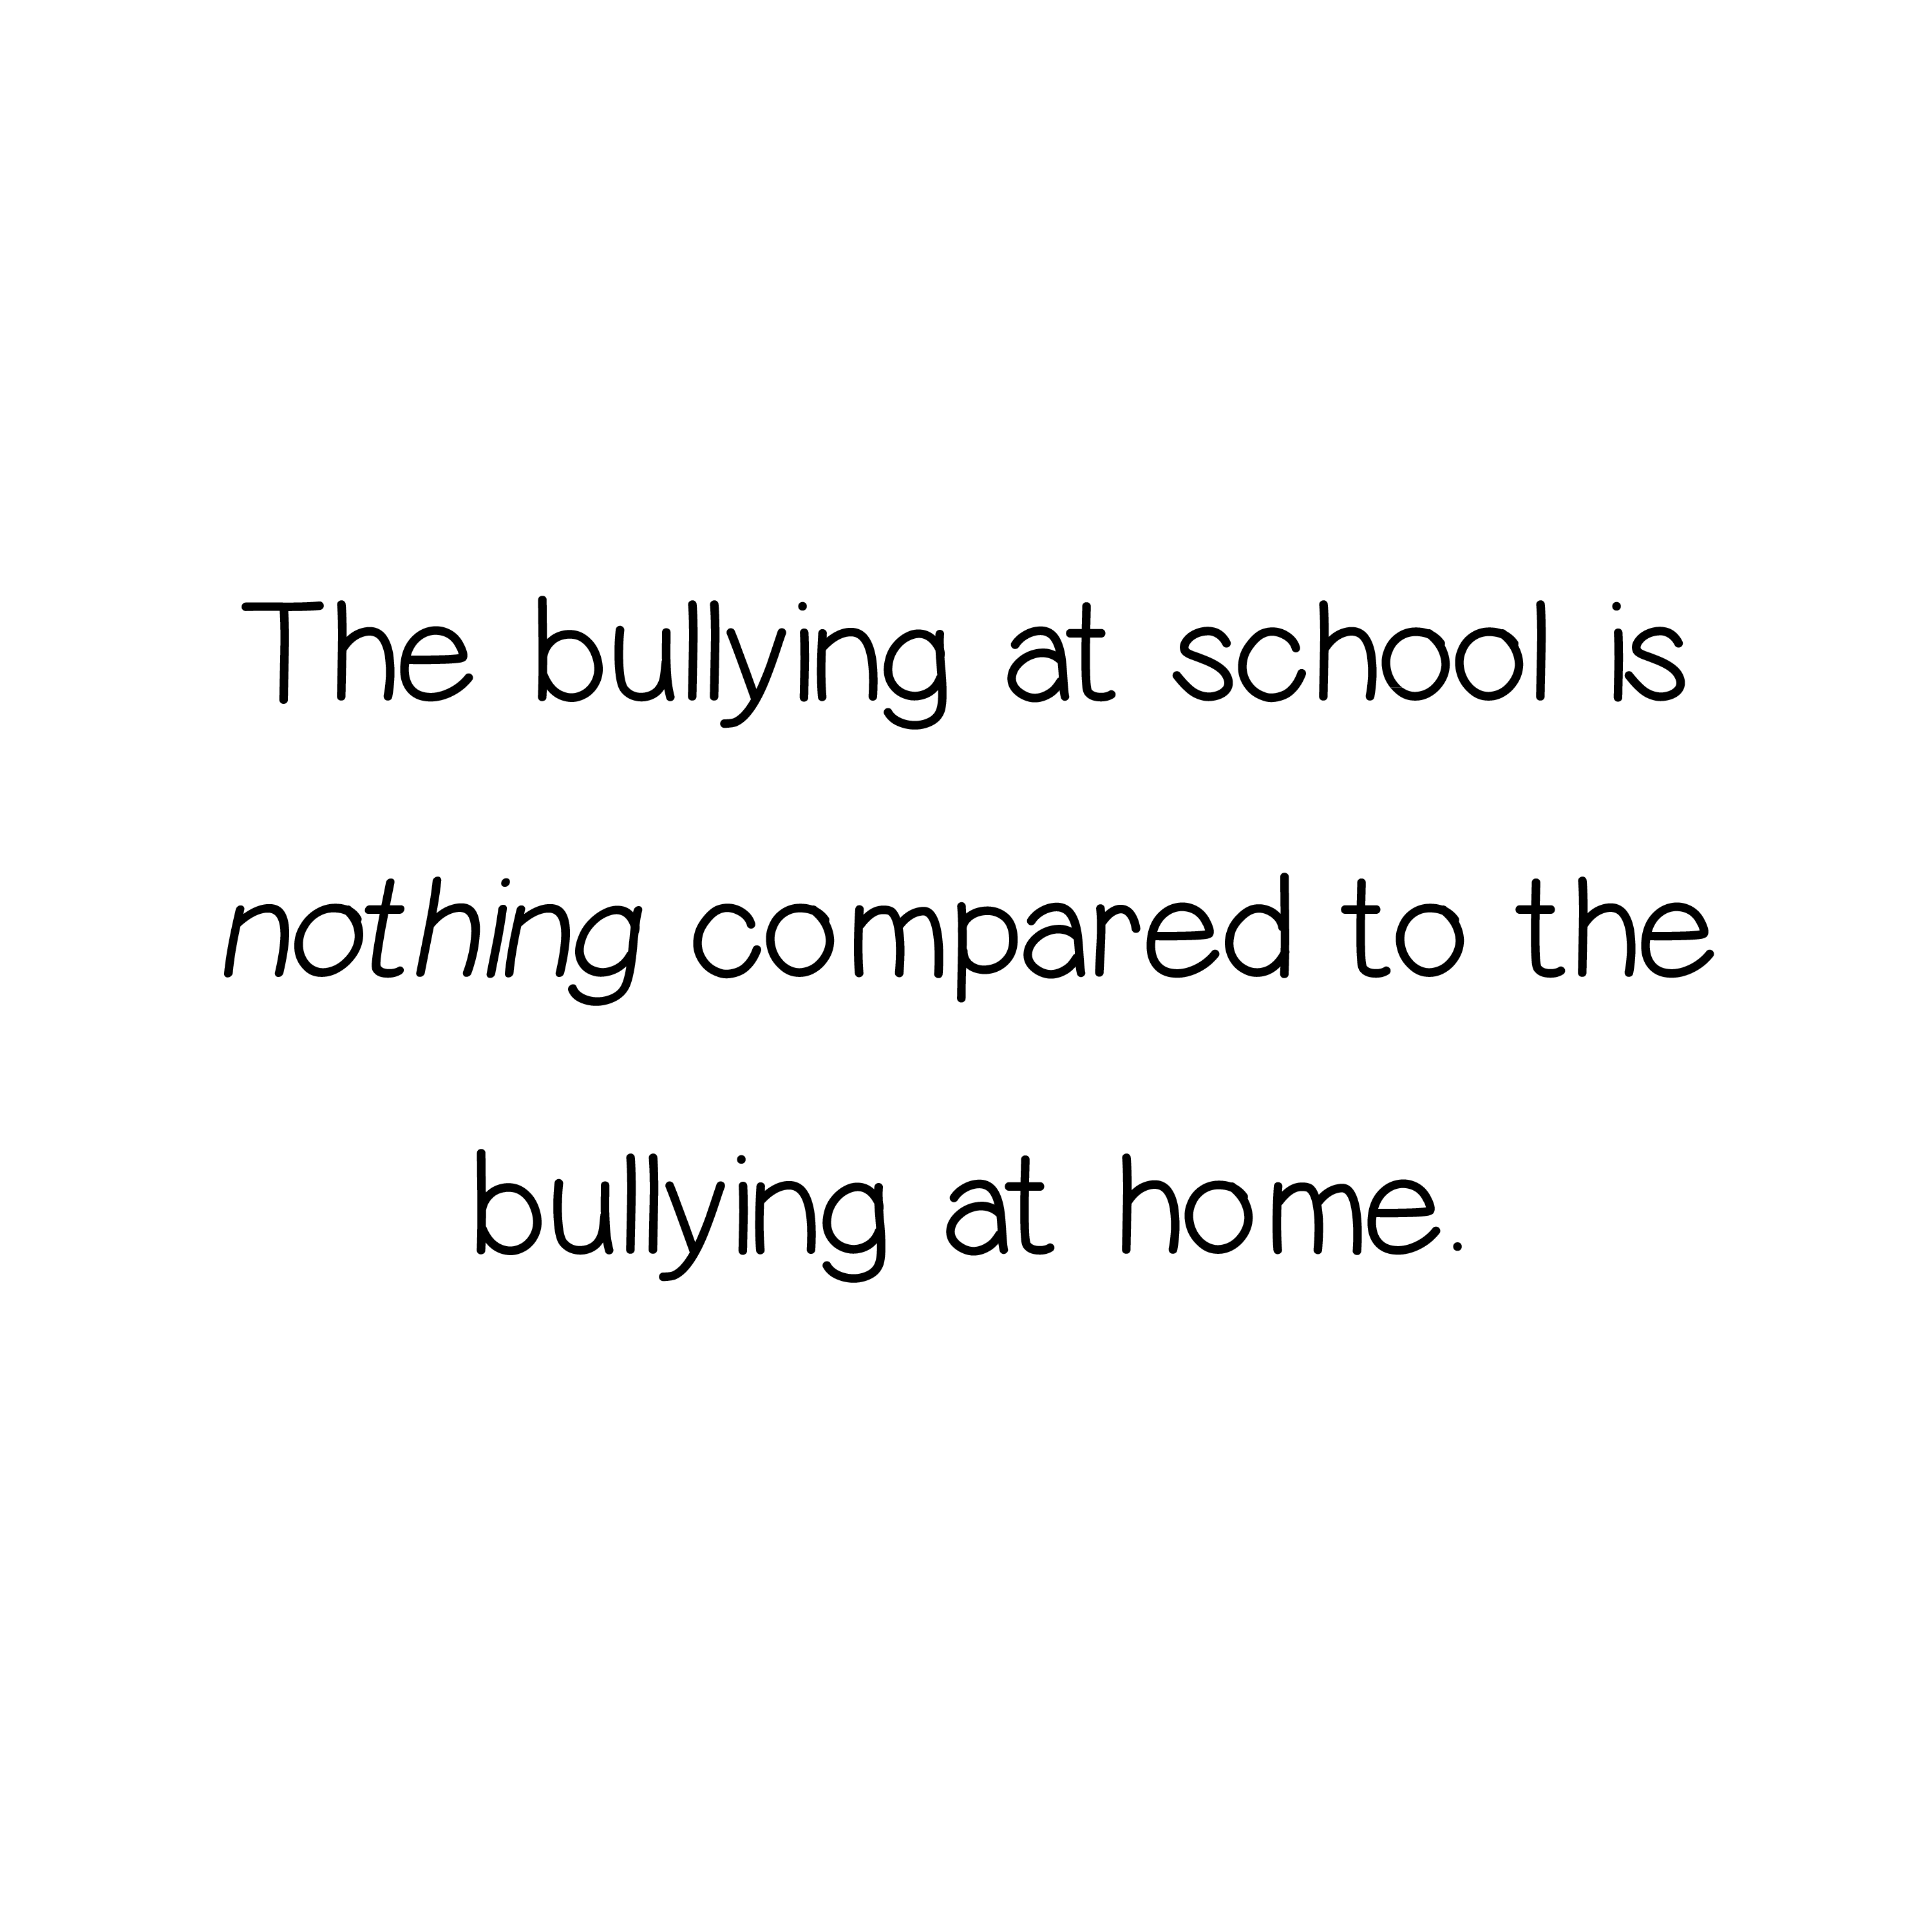 Bullying at school is nothing compared to bullying at home